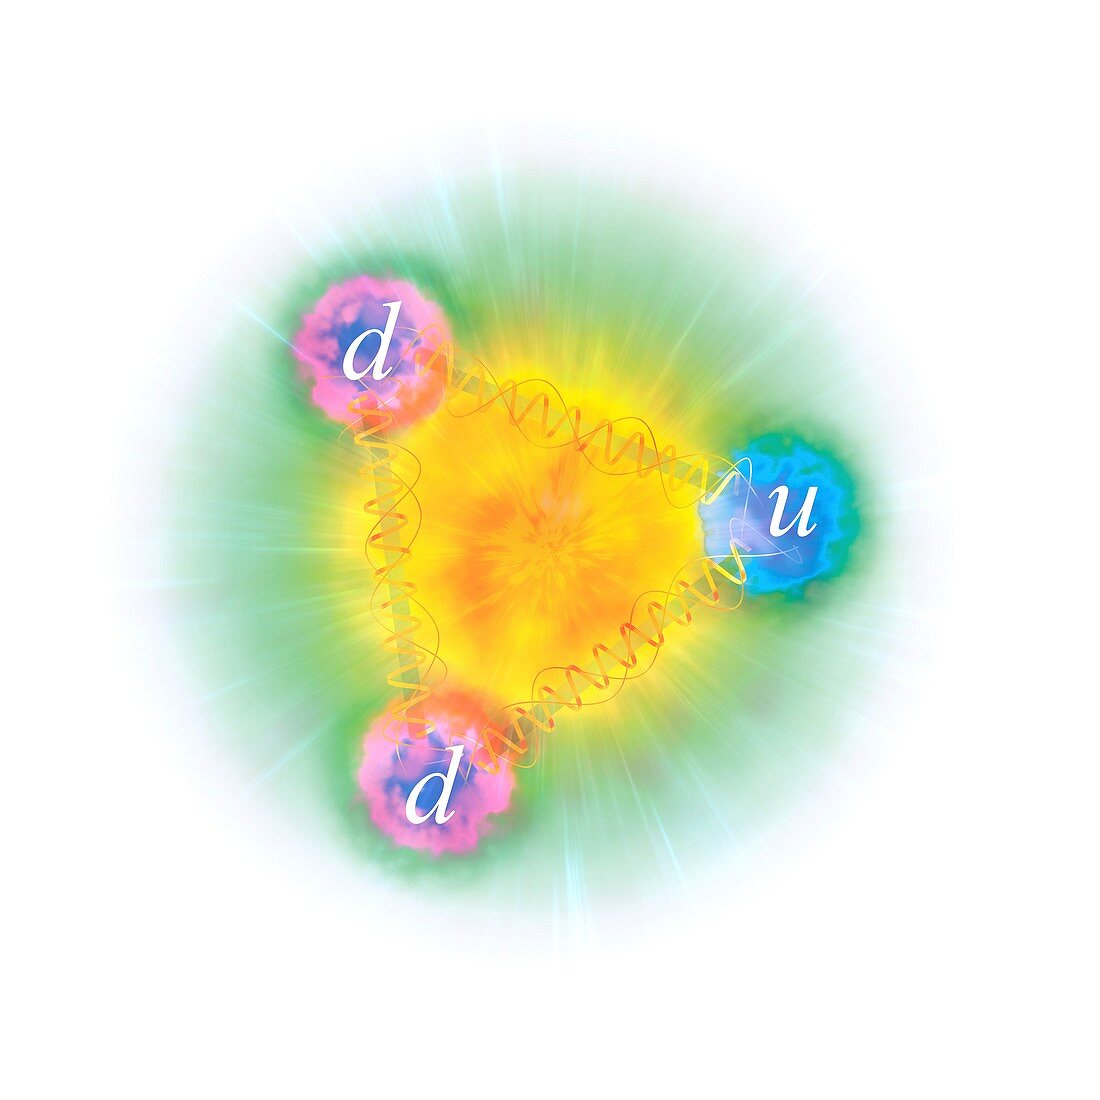 Artwork of the structure of a neutron